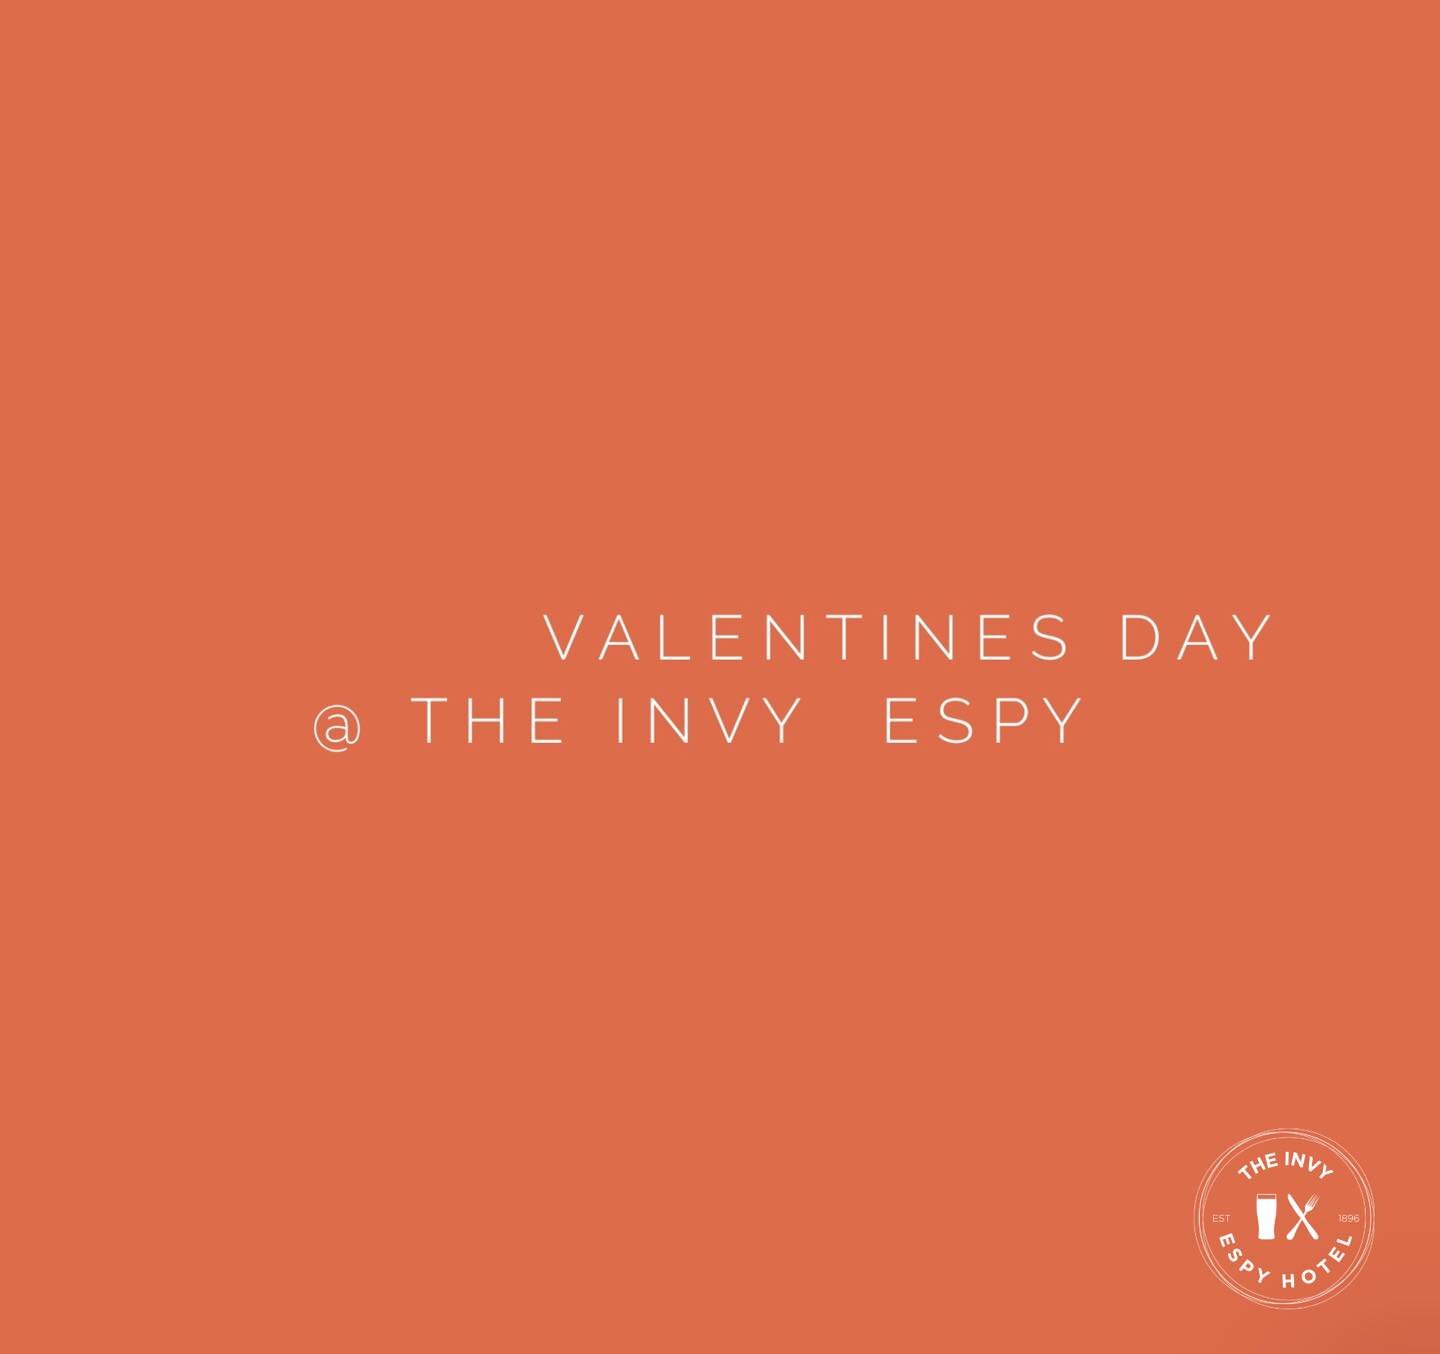 Looking for the perfect way to sweep your special person off their feet? Look no further! ✨ 
Book a table for two, hassle-free, either online or with our super-friendly staff 🙌🏼
#theinvyespy #spreadthelove #willyoubeerme